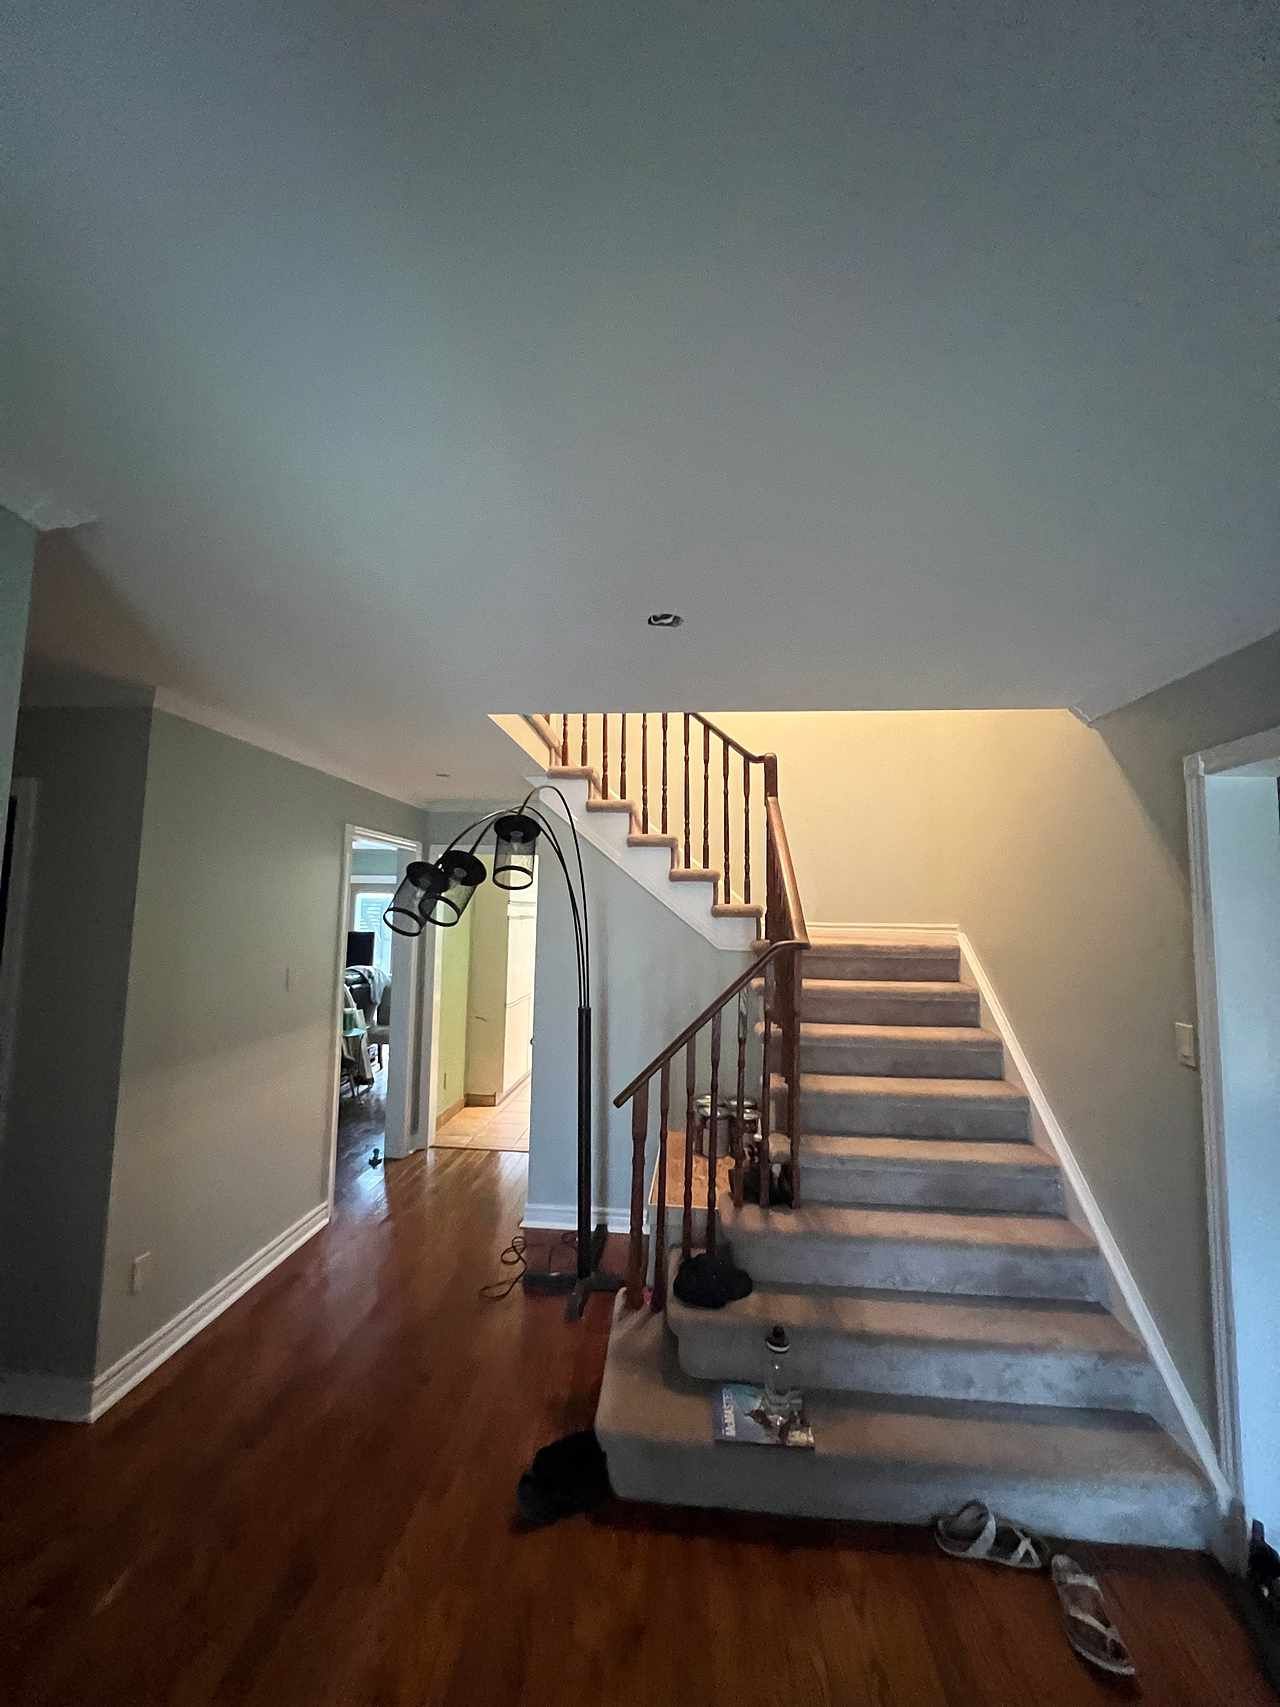 A hallway with stairs leading up to the second floor of a house.